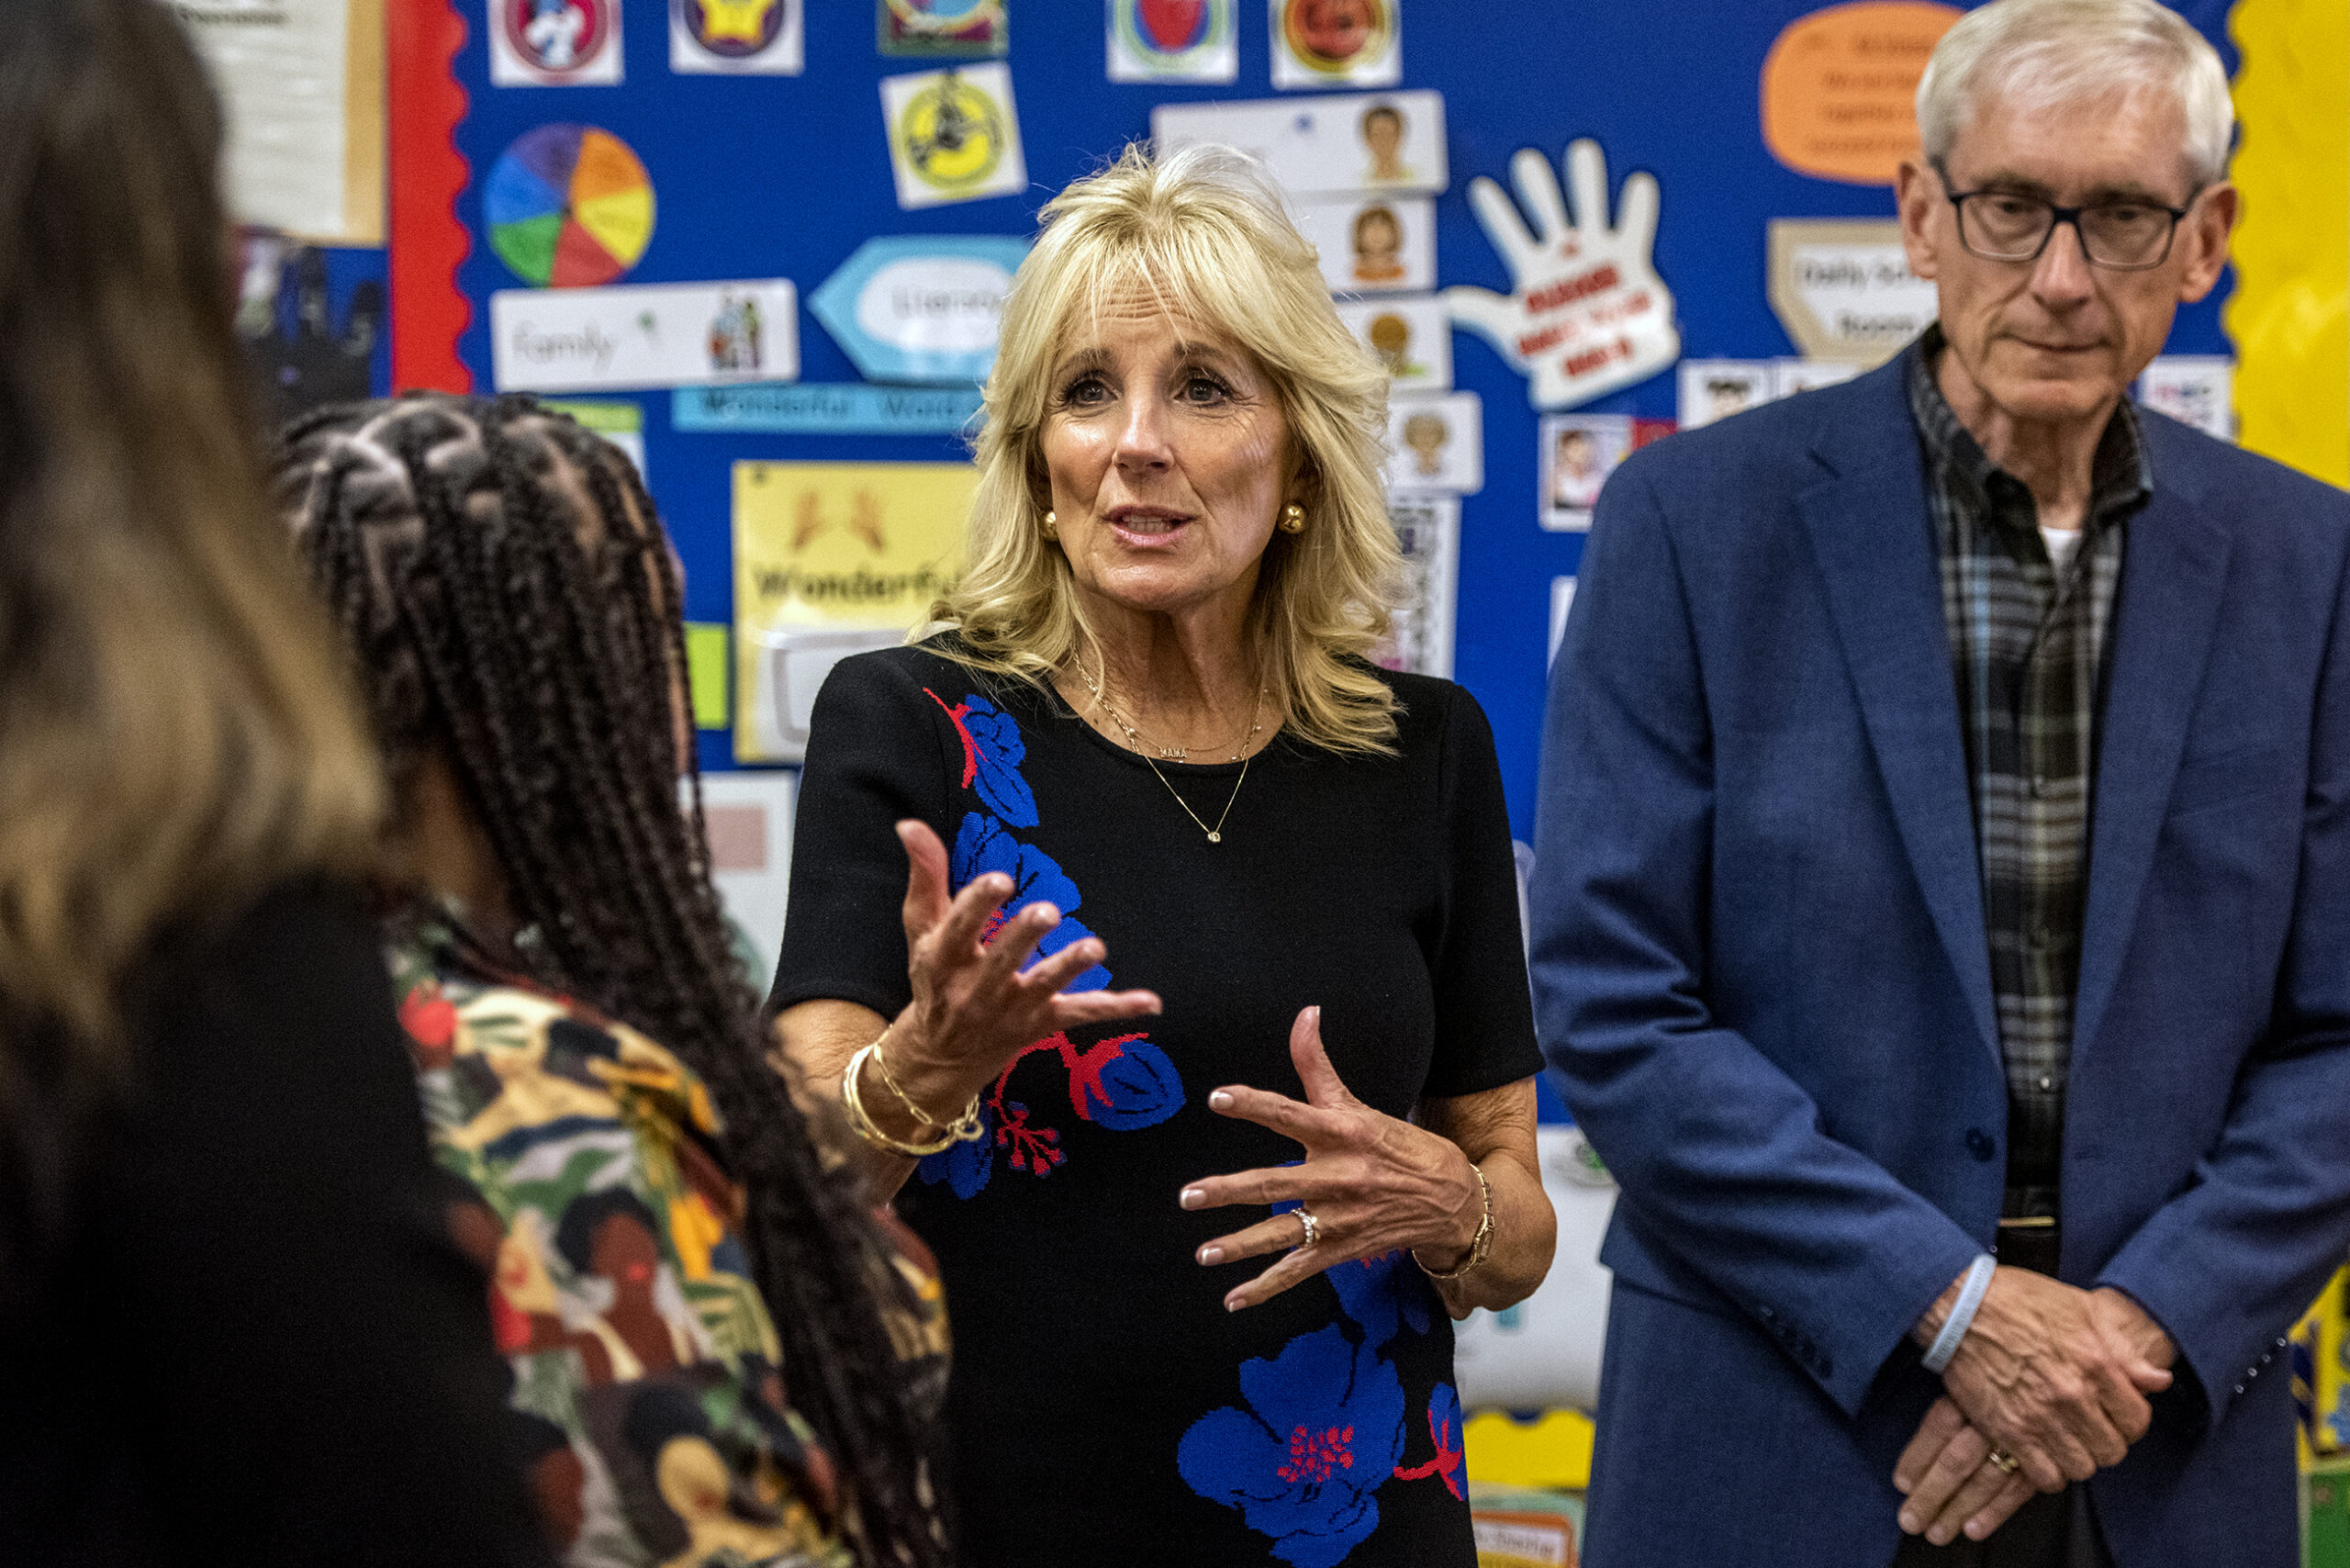 Jill Biden gestures while speaking in an elementary school classroom while standing next to Gov. Tony Evers.